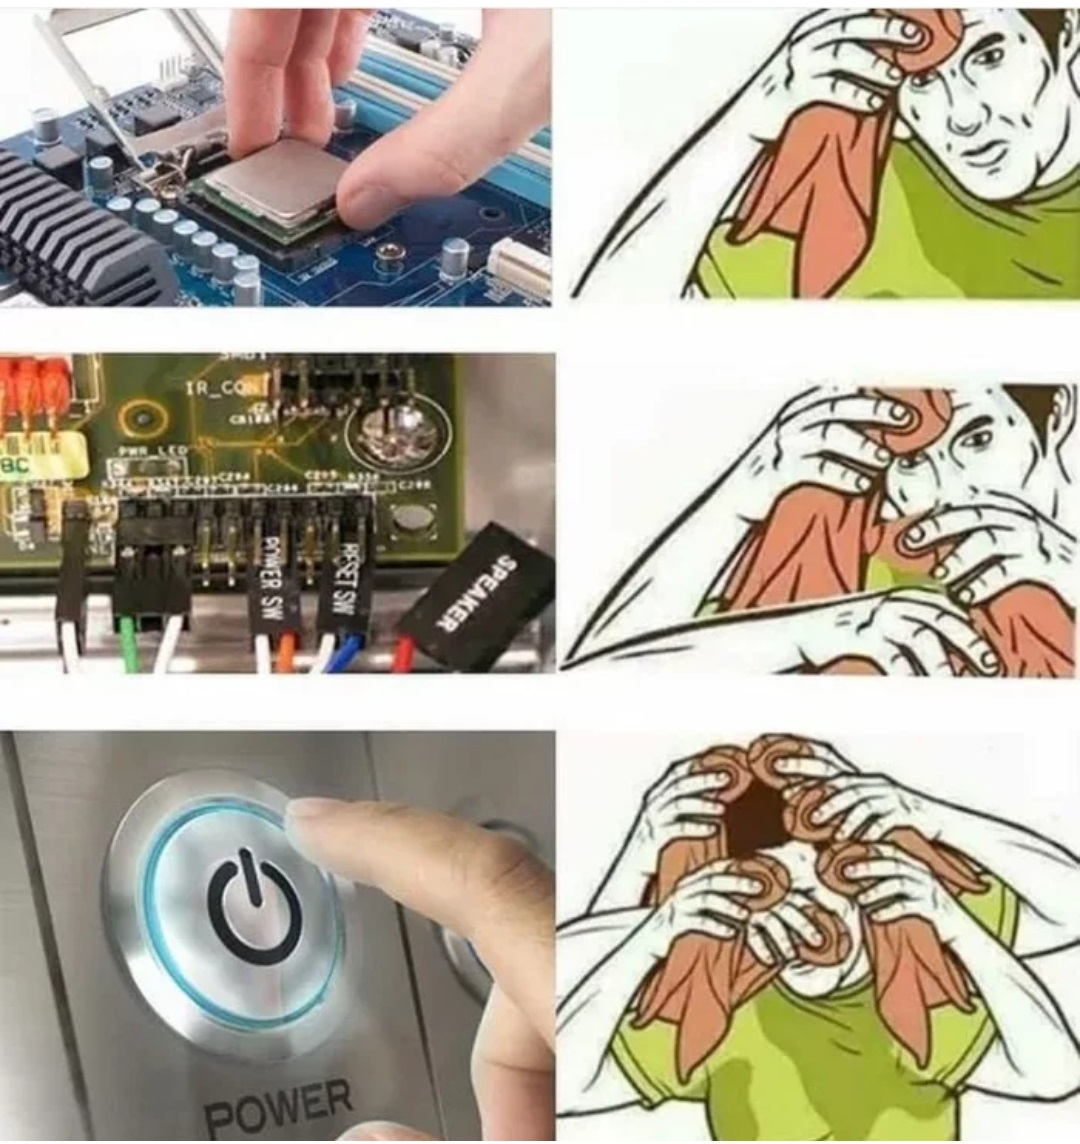 Meme of building an own computer